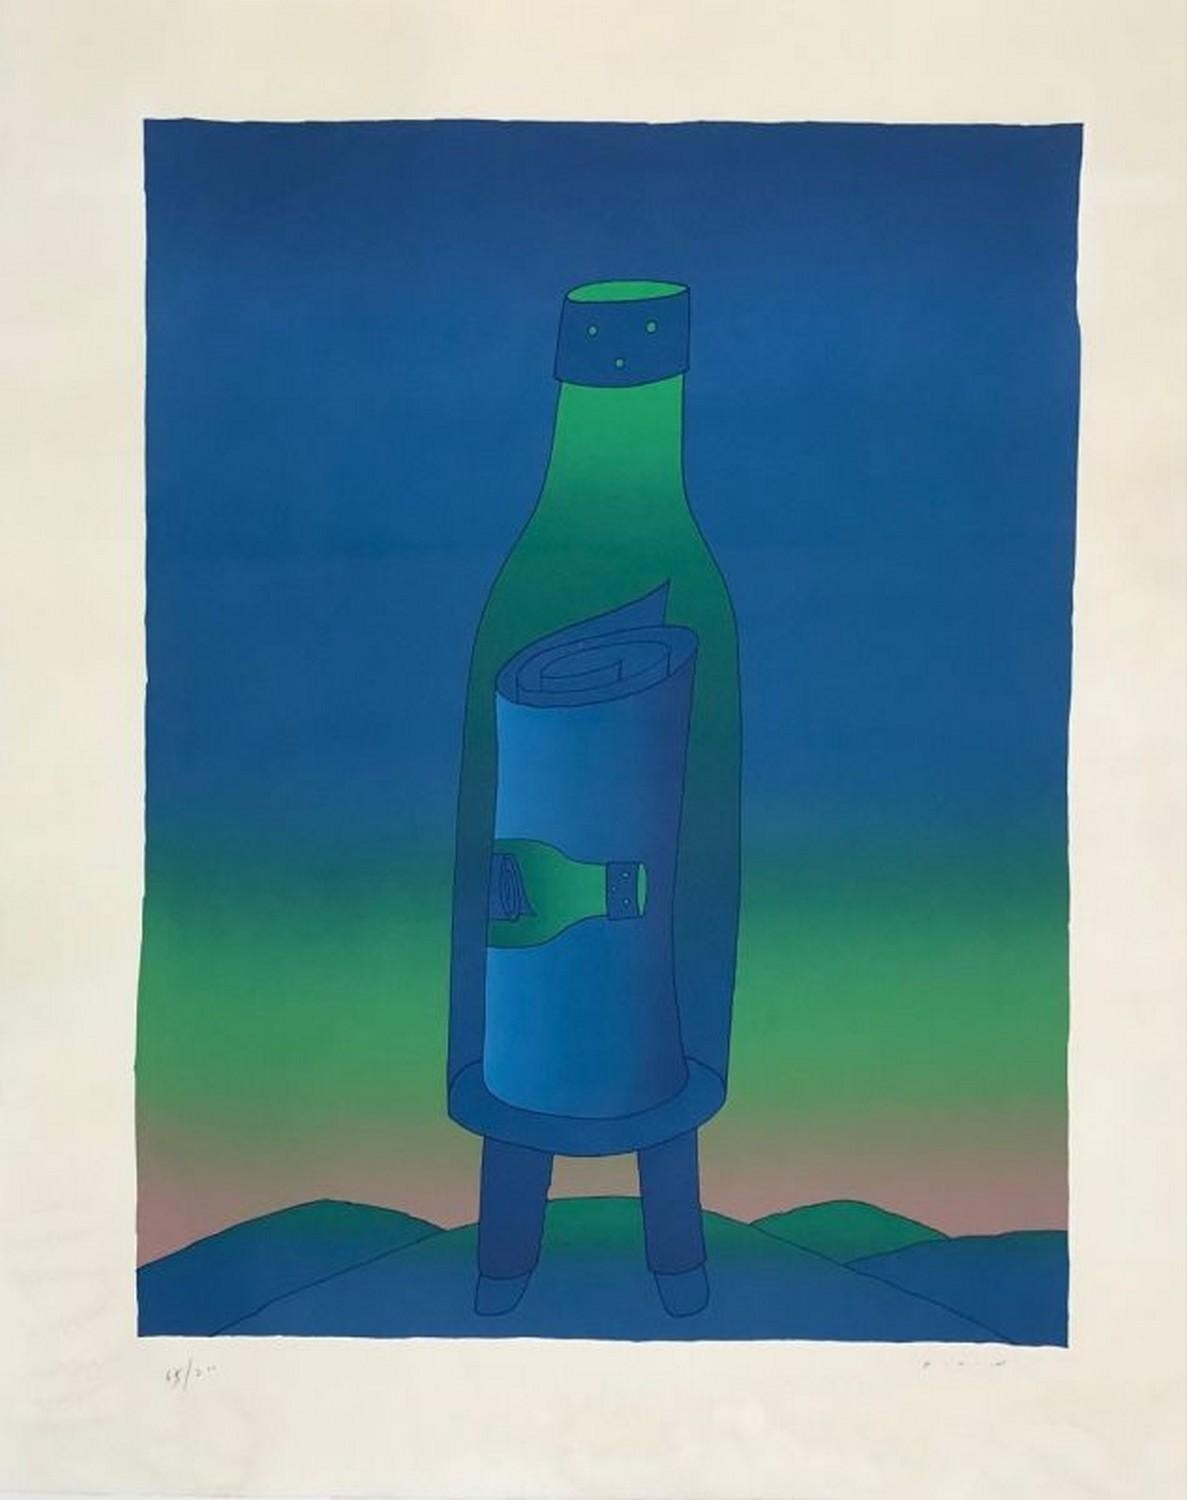 Abstract Print Jean Michel Folon - The Bottled Message 